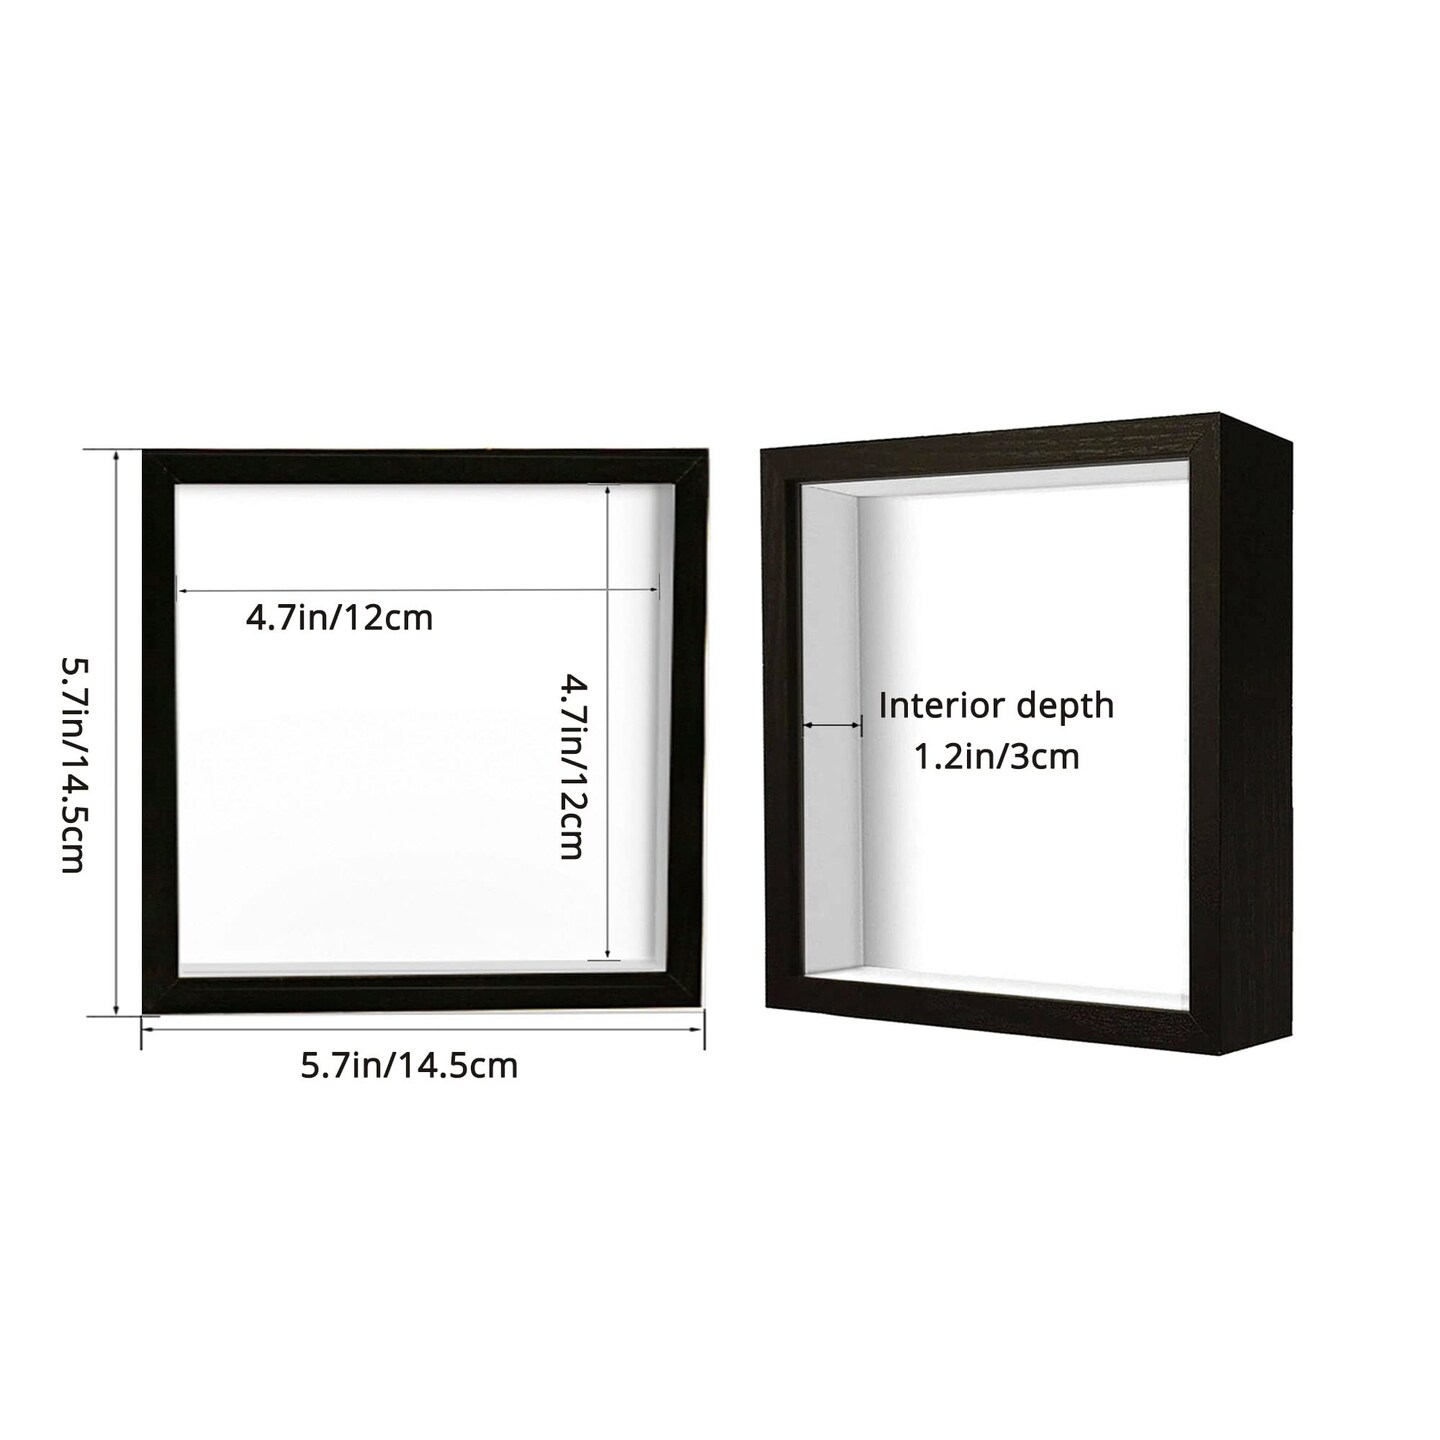 SUNMEG Small Shadow Box Frame 5x5, Wood with Plexiglass, Display Case Box for Memorabilia, Medal, Crafts,Tickets and Photos, Picture Frame for Wall and Tabletop (Black, 5x5)